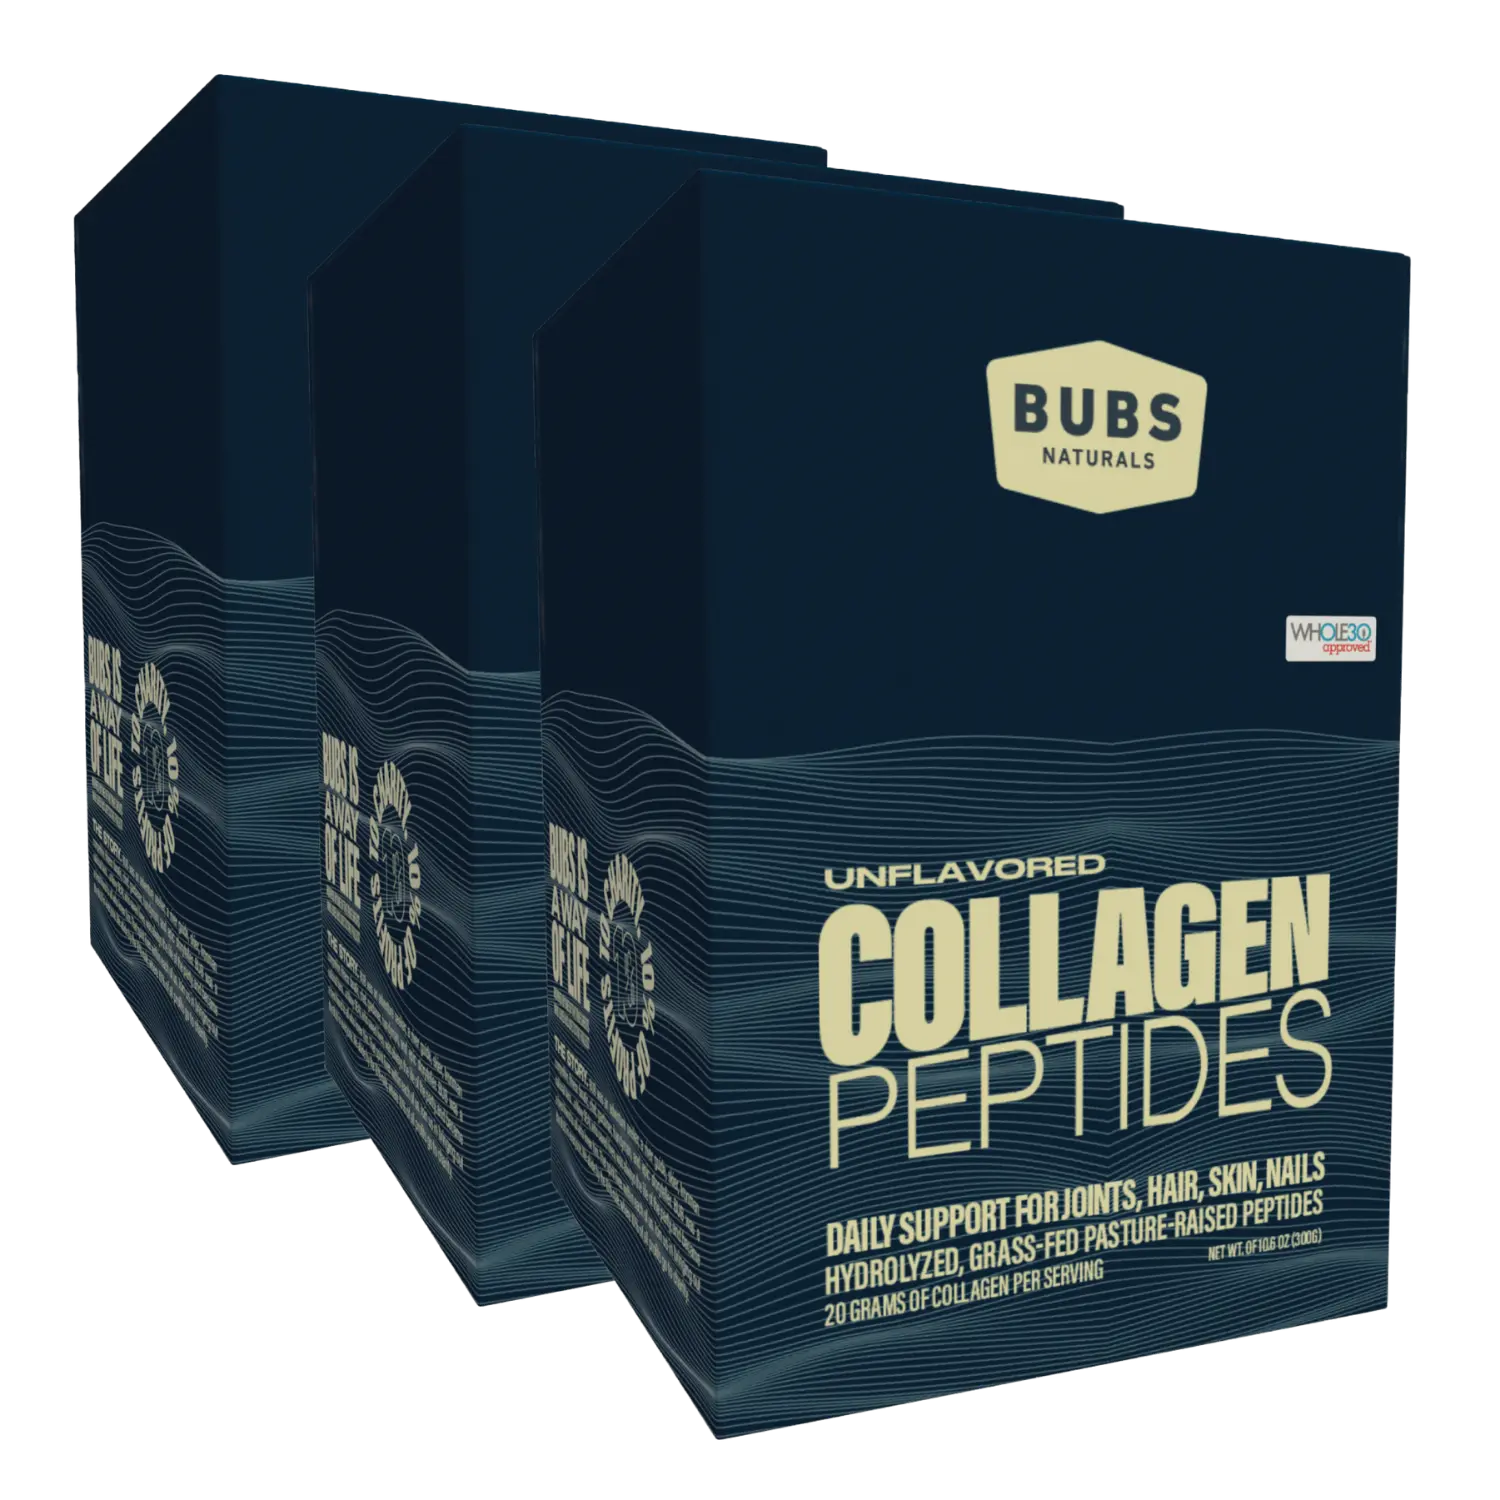 Unflavored Collagen Peptides Protein Powder, 20 count single-use stick packs, BUBS NATURALS, Travel Packs, 3 pack bundle